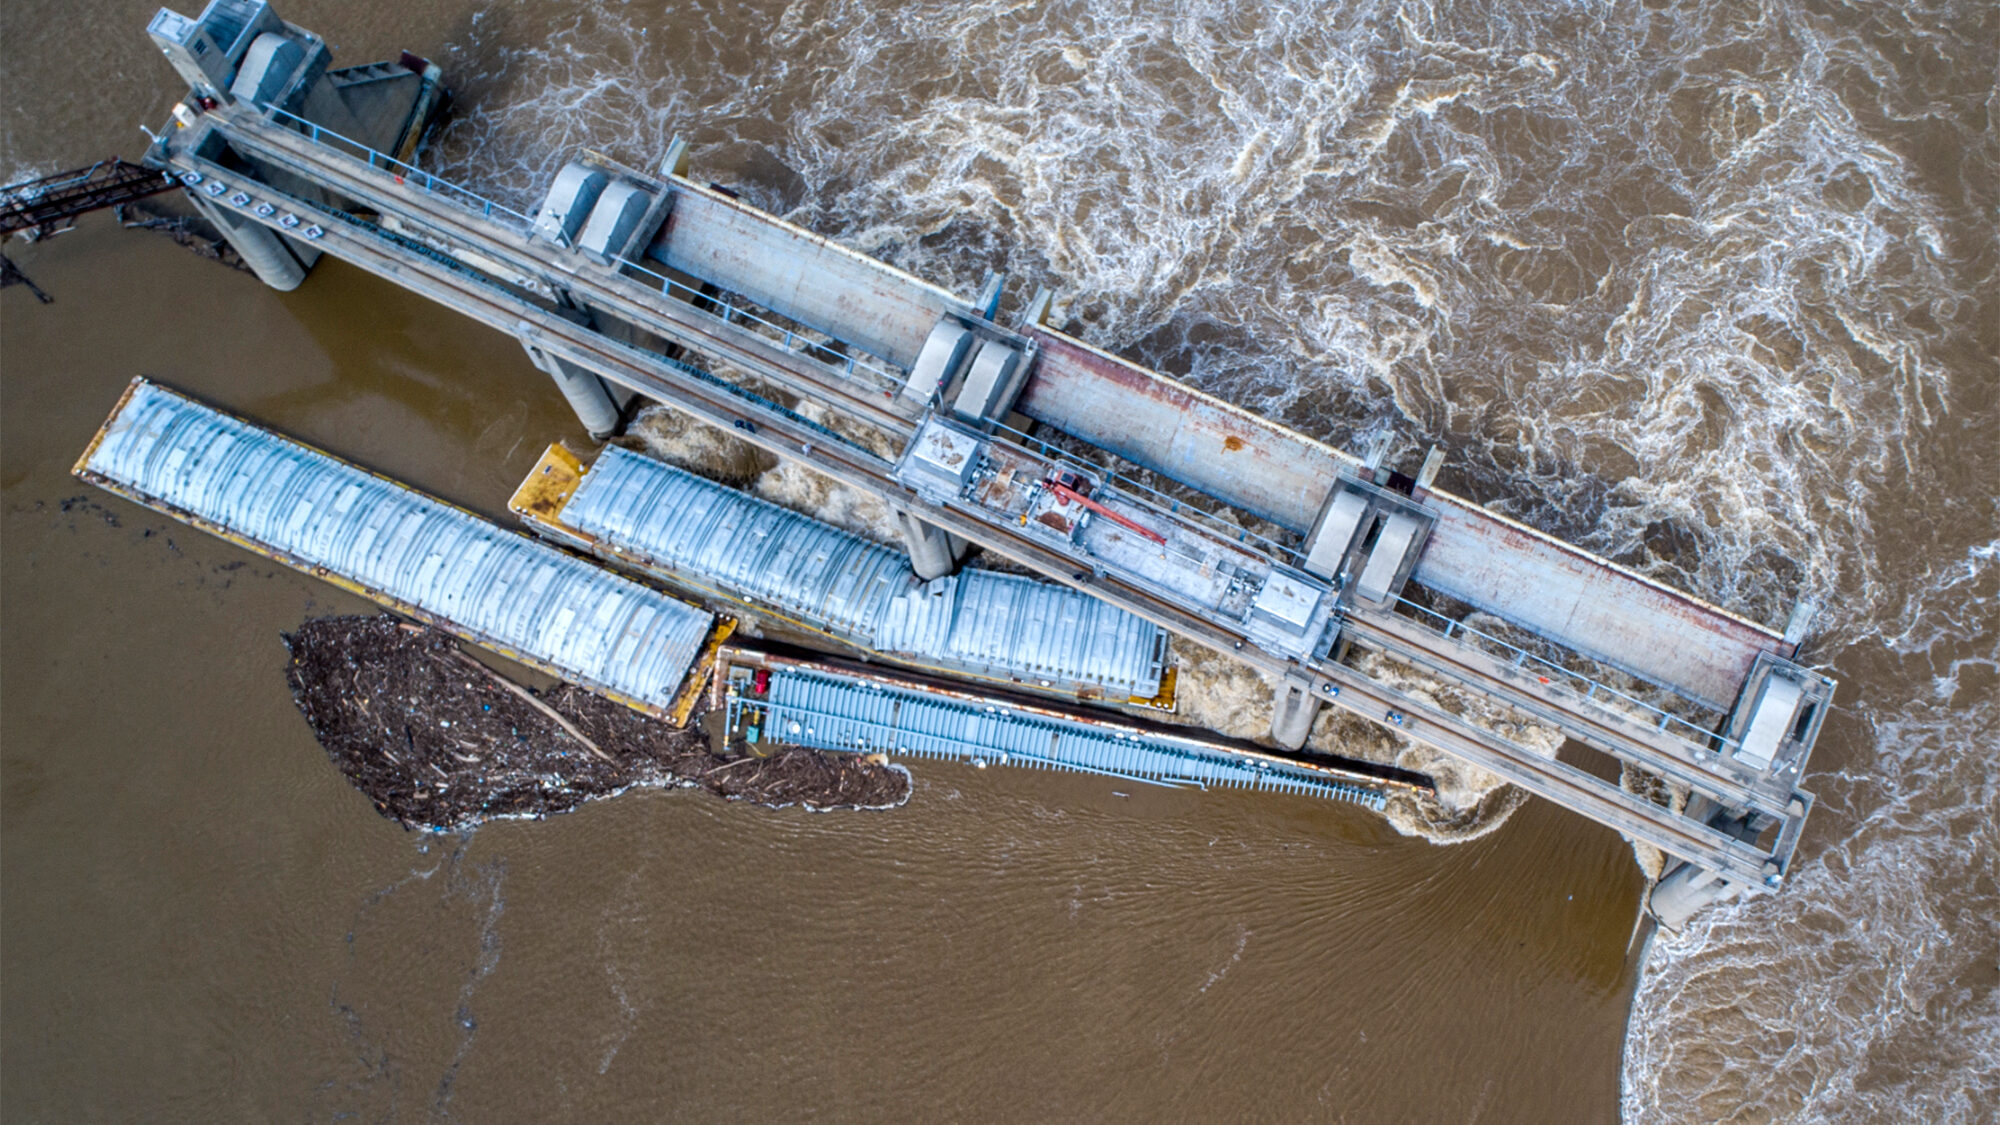 Two barges are seen stuck in the Ohio River; one has been removed, while the other remains. Mandato...